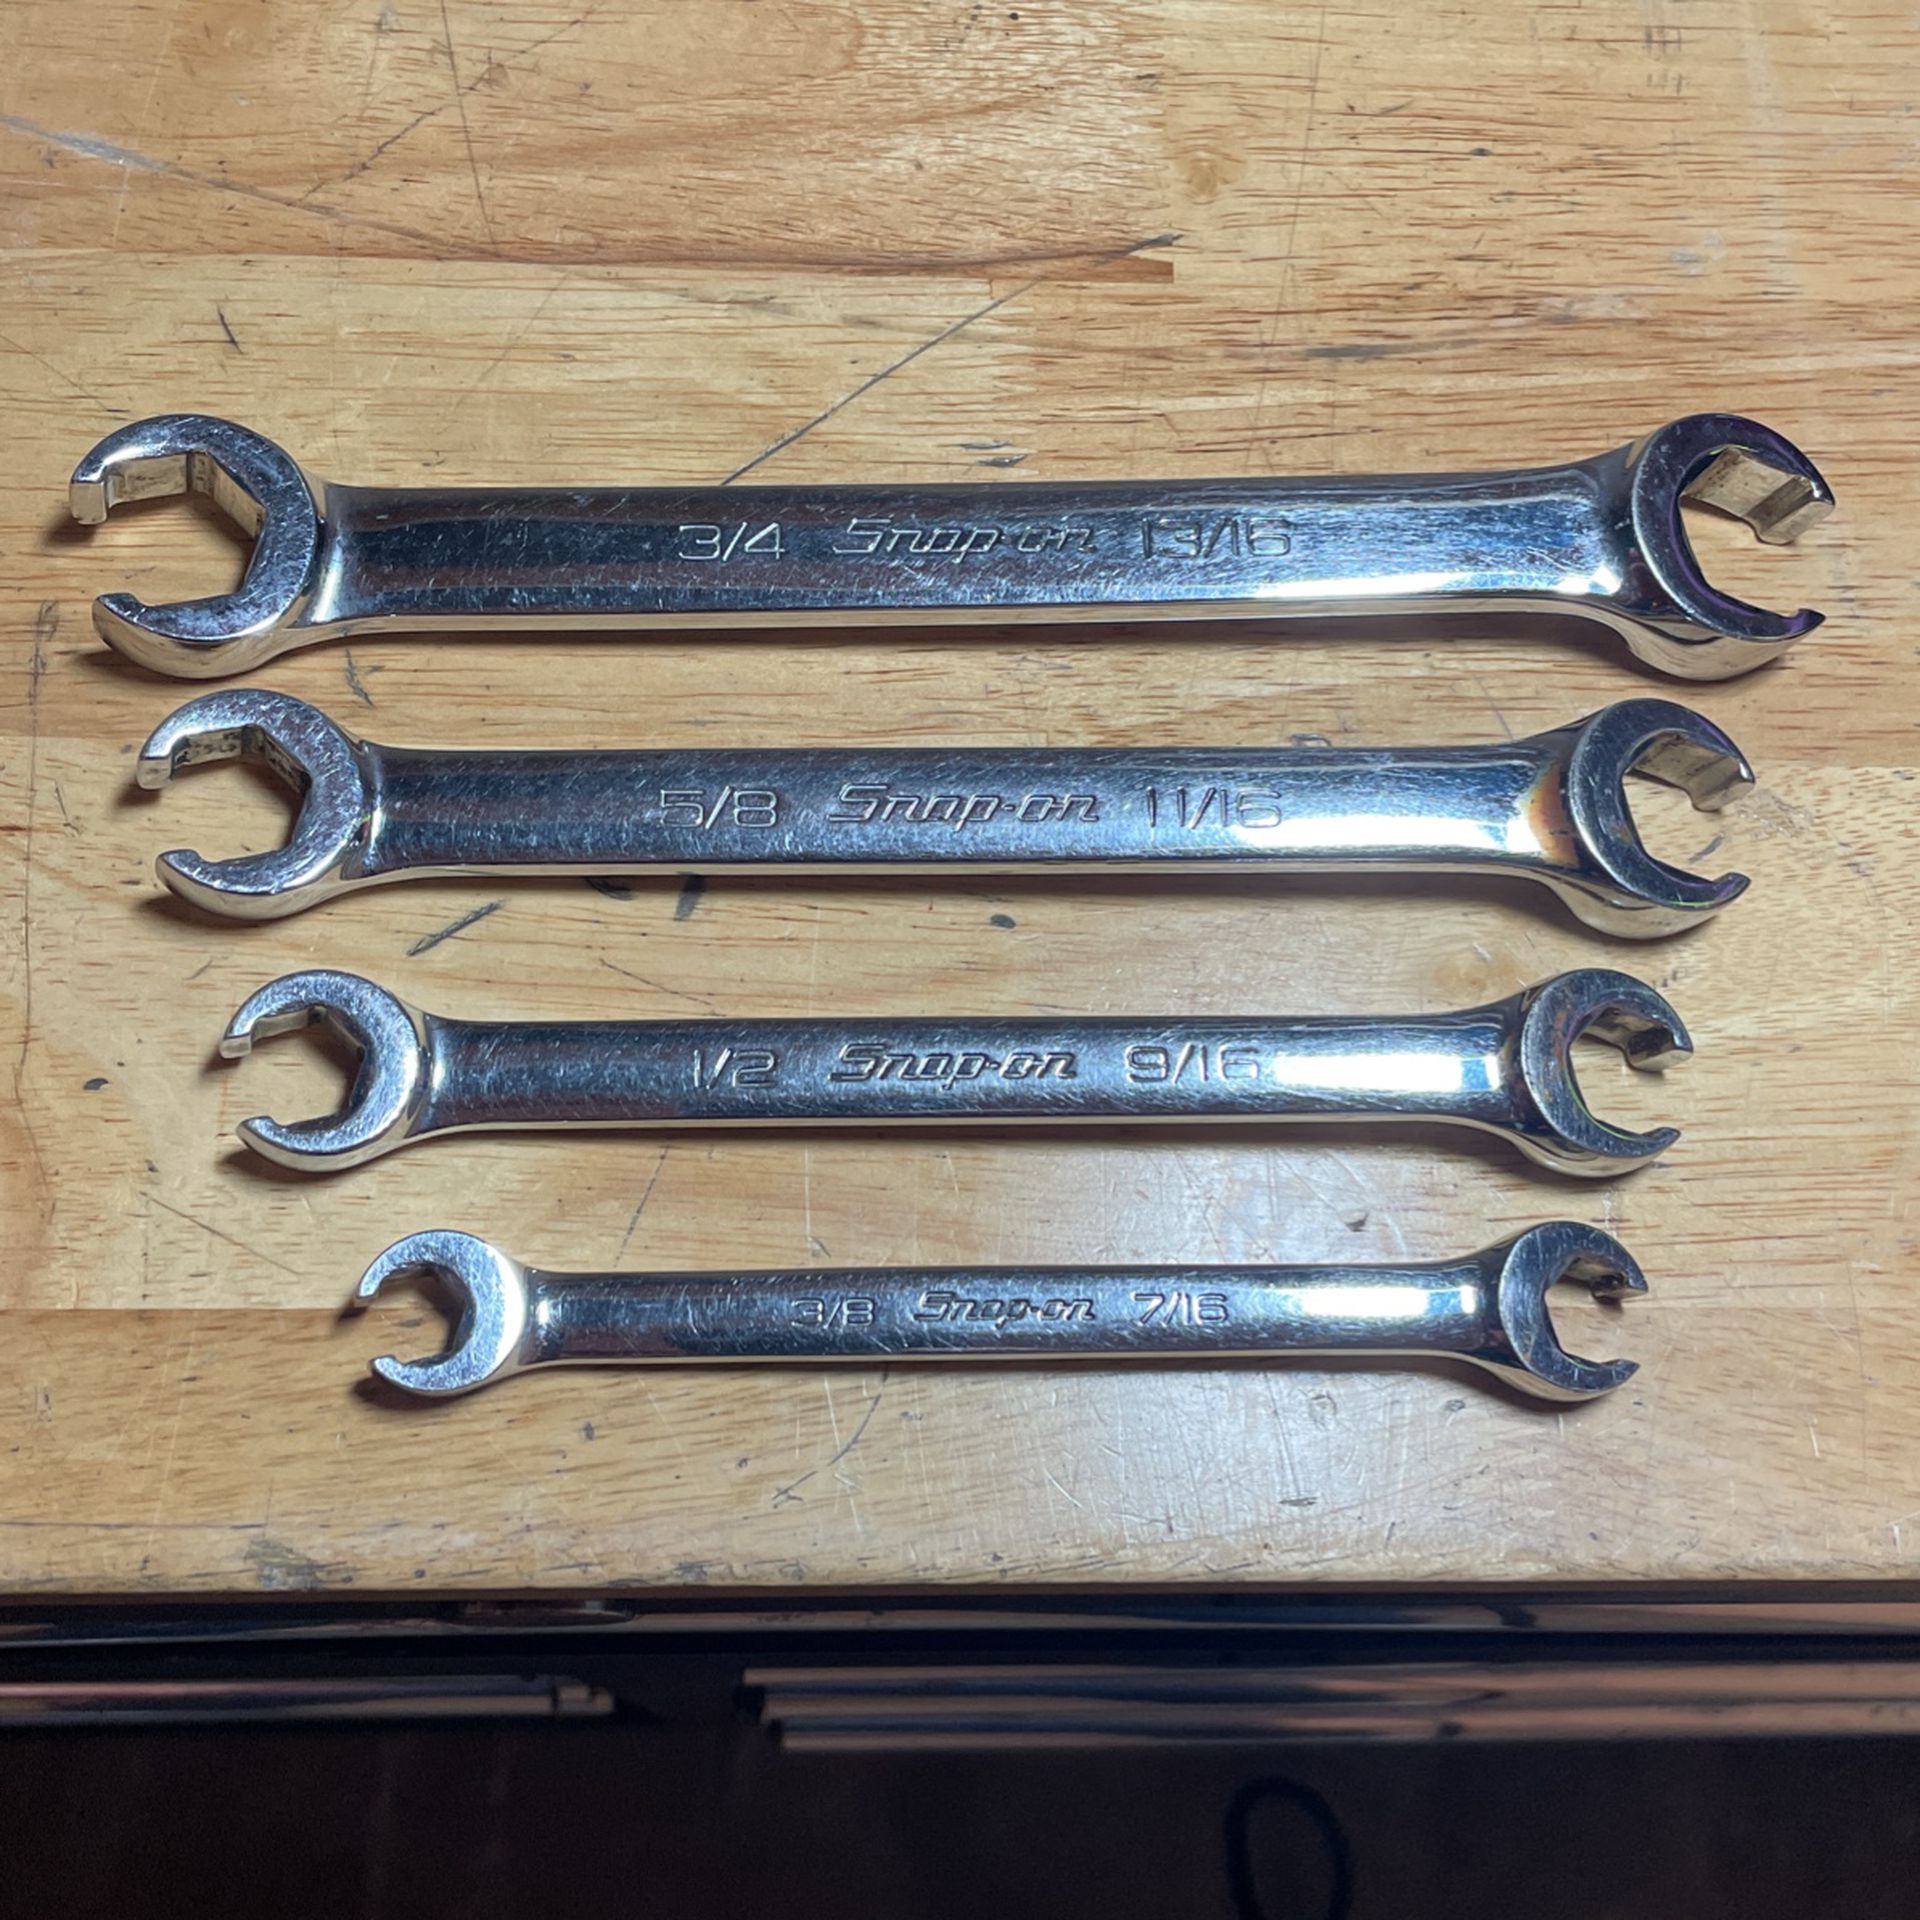 Snap On Flare Nut Wrenches